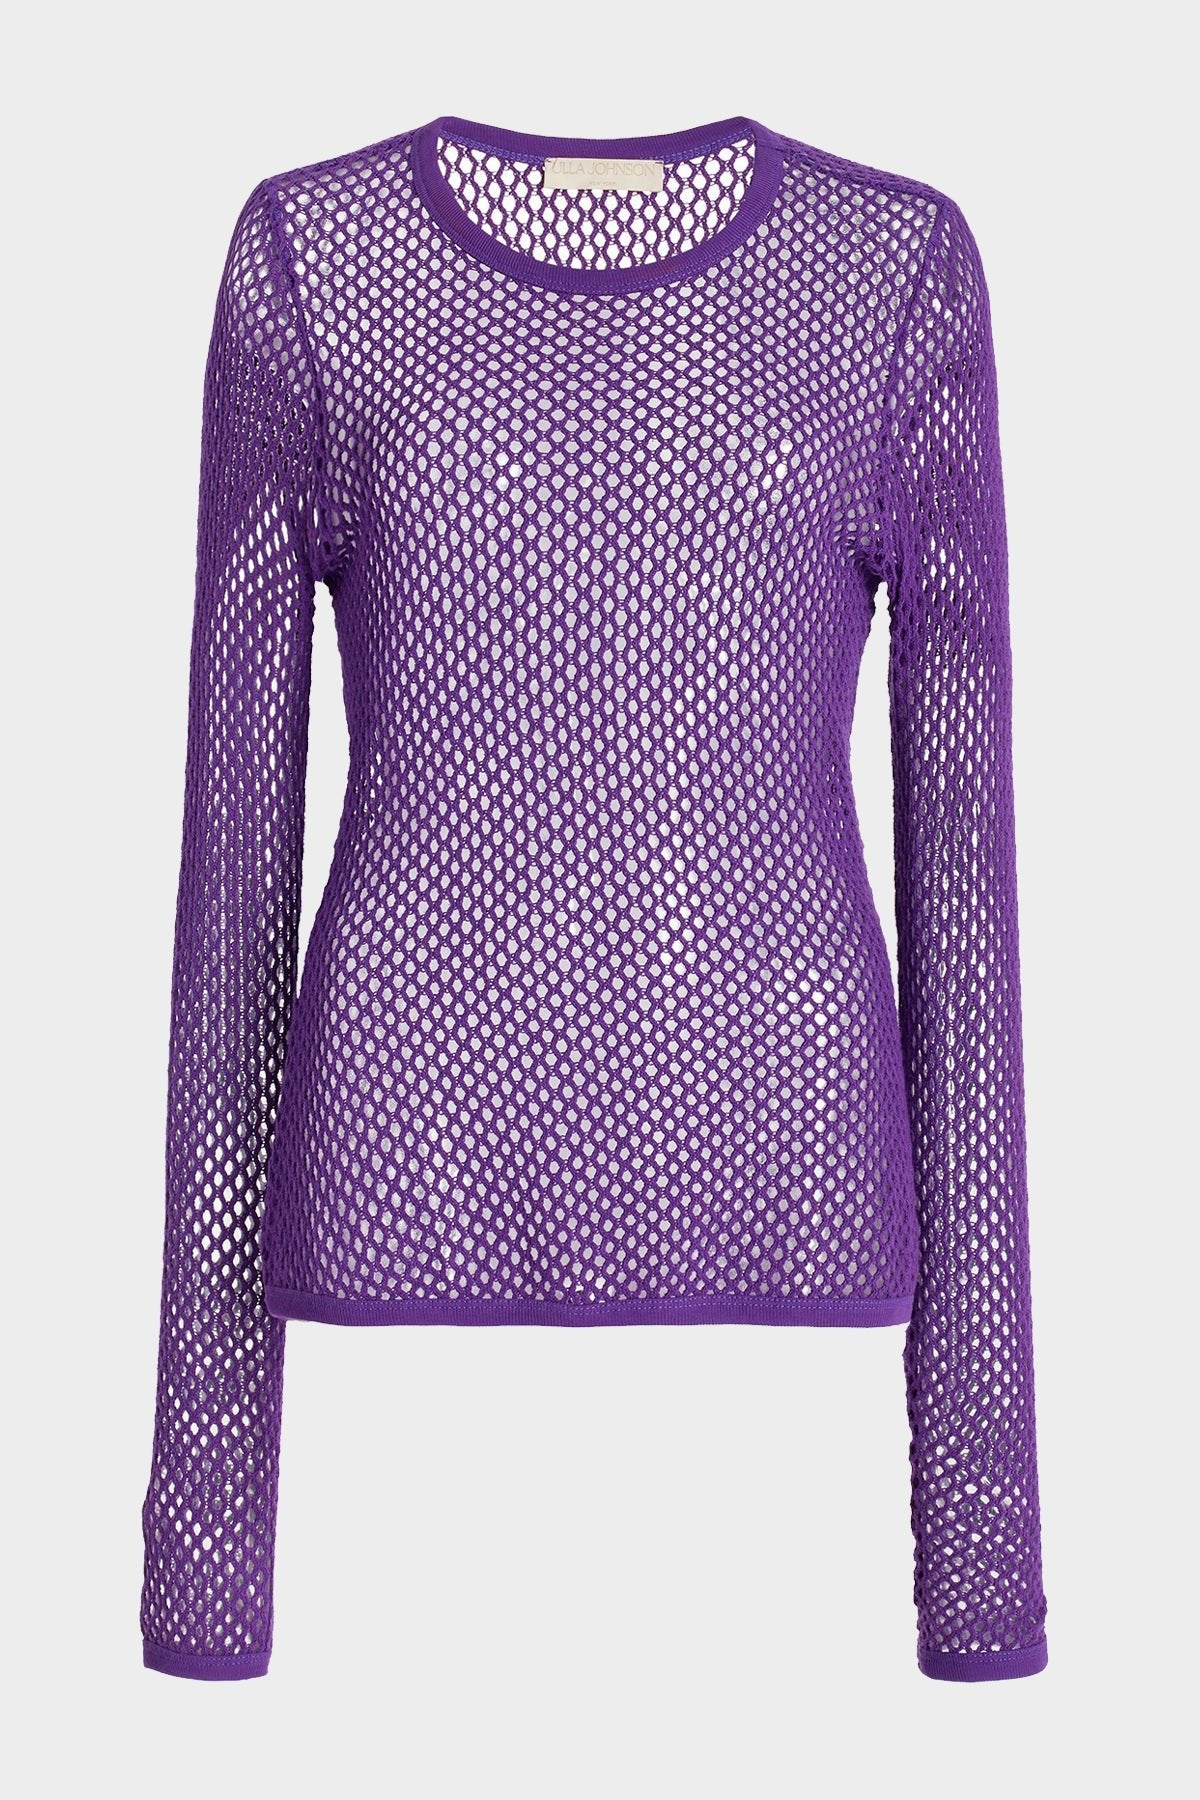 Rio Cotton Fishnet Long Sleeve Top in Cassis - shop-olivia.com